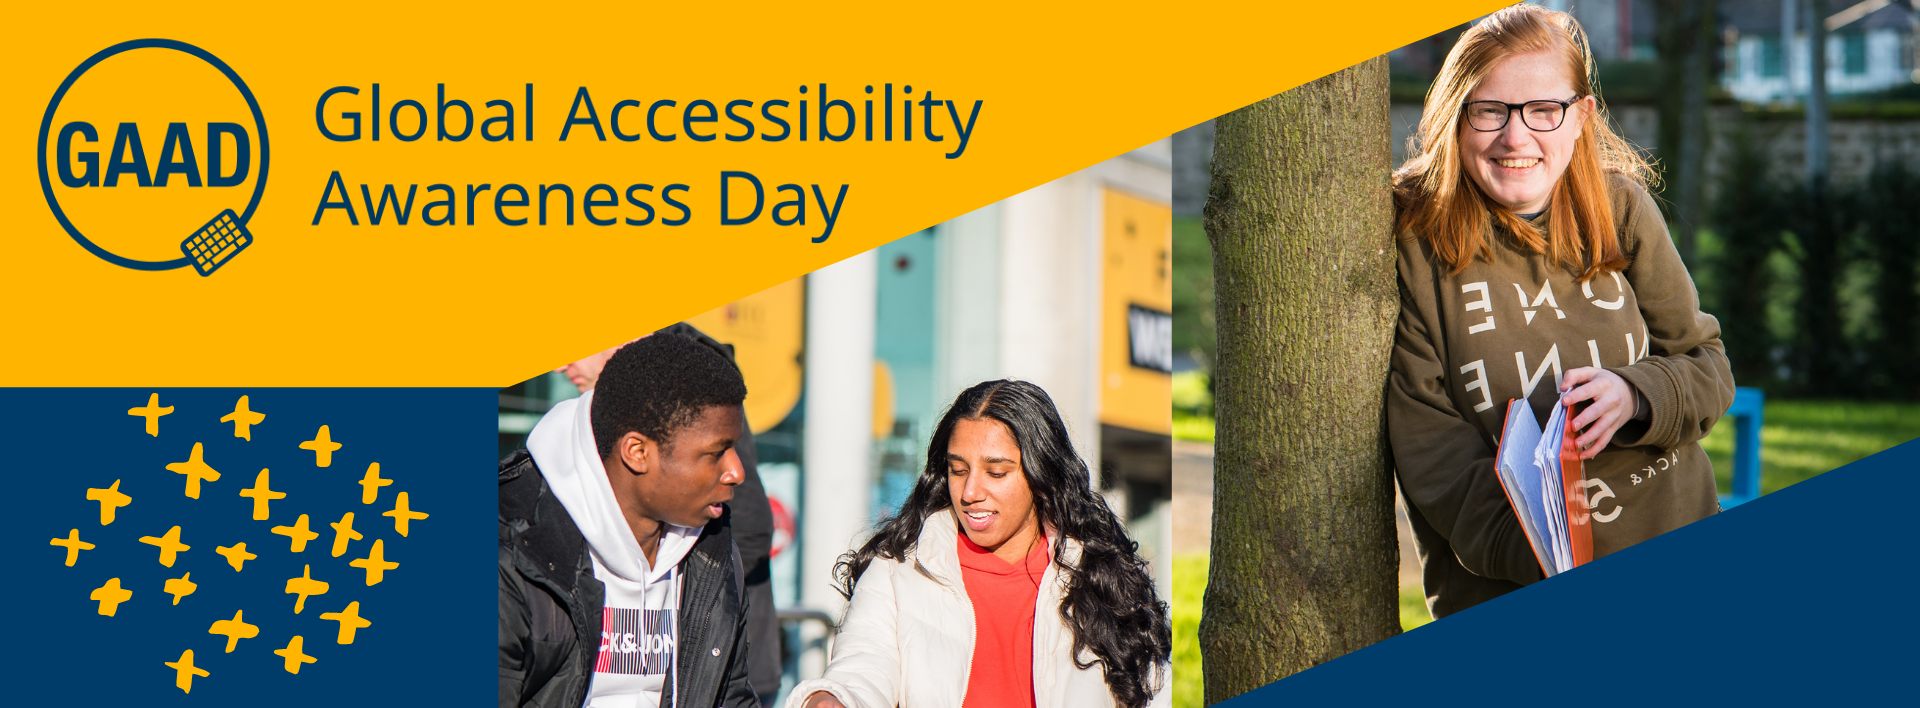 Global Accessibility Day Banner